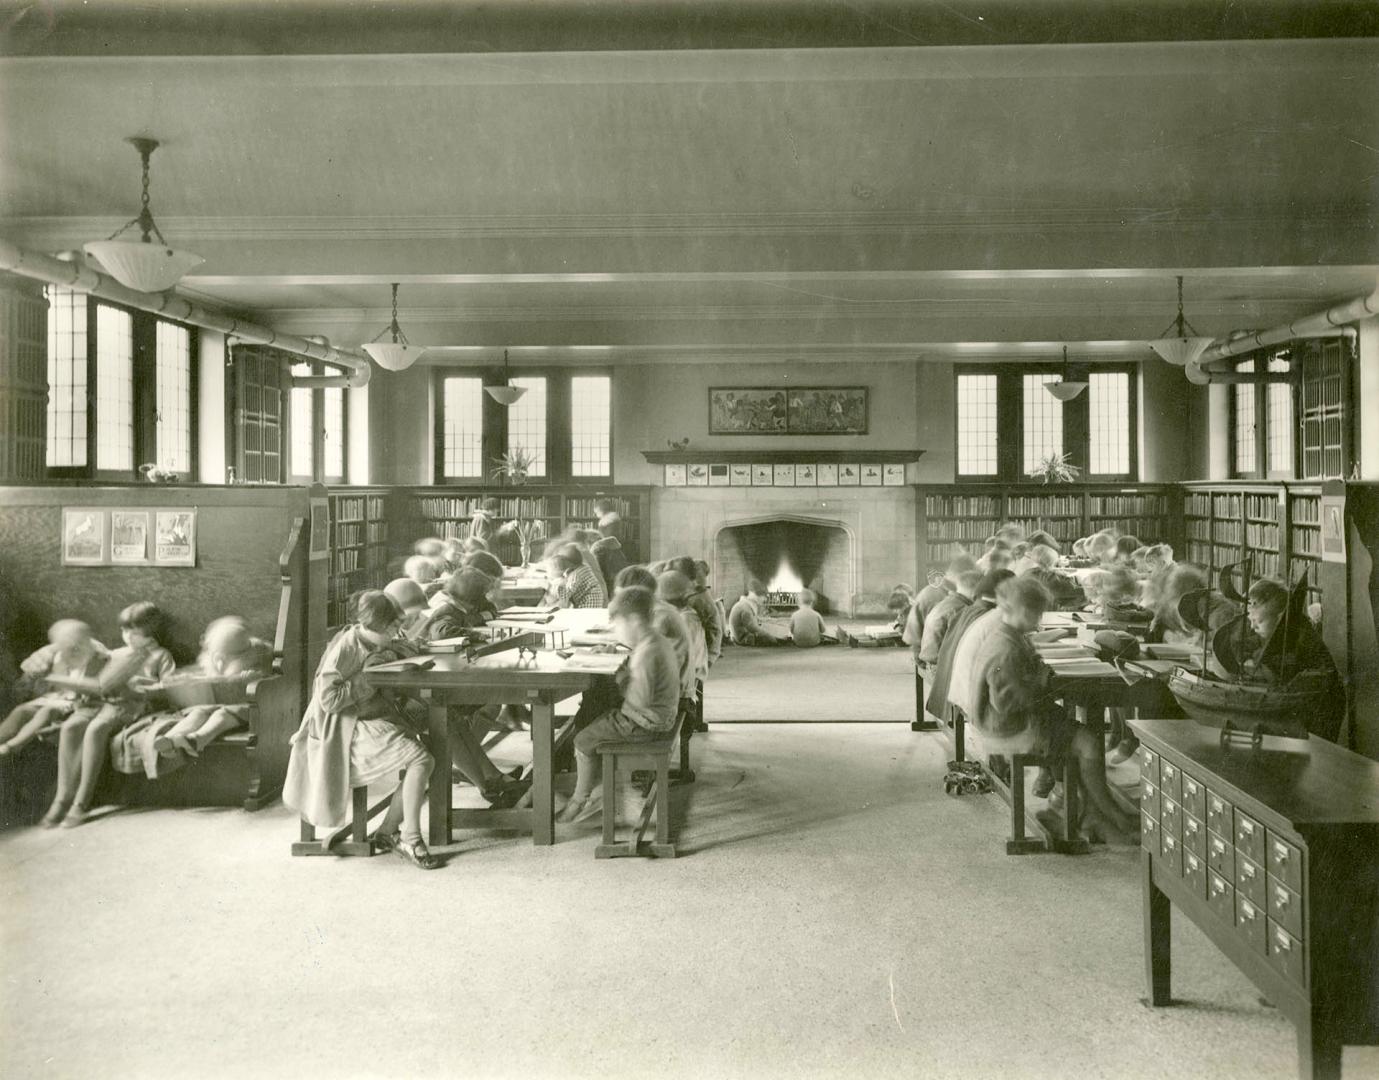 Image shows an interior of the branch. There are a lot of children sitting at the desks.